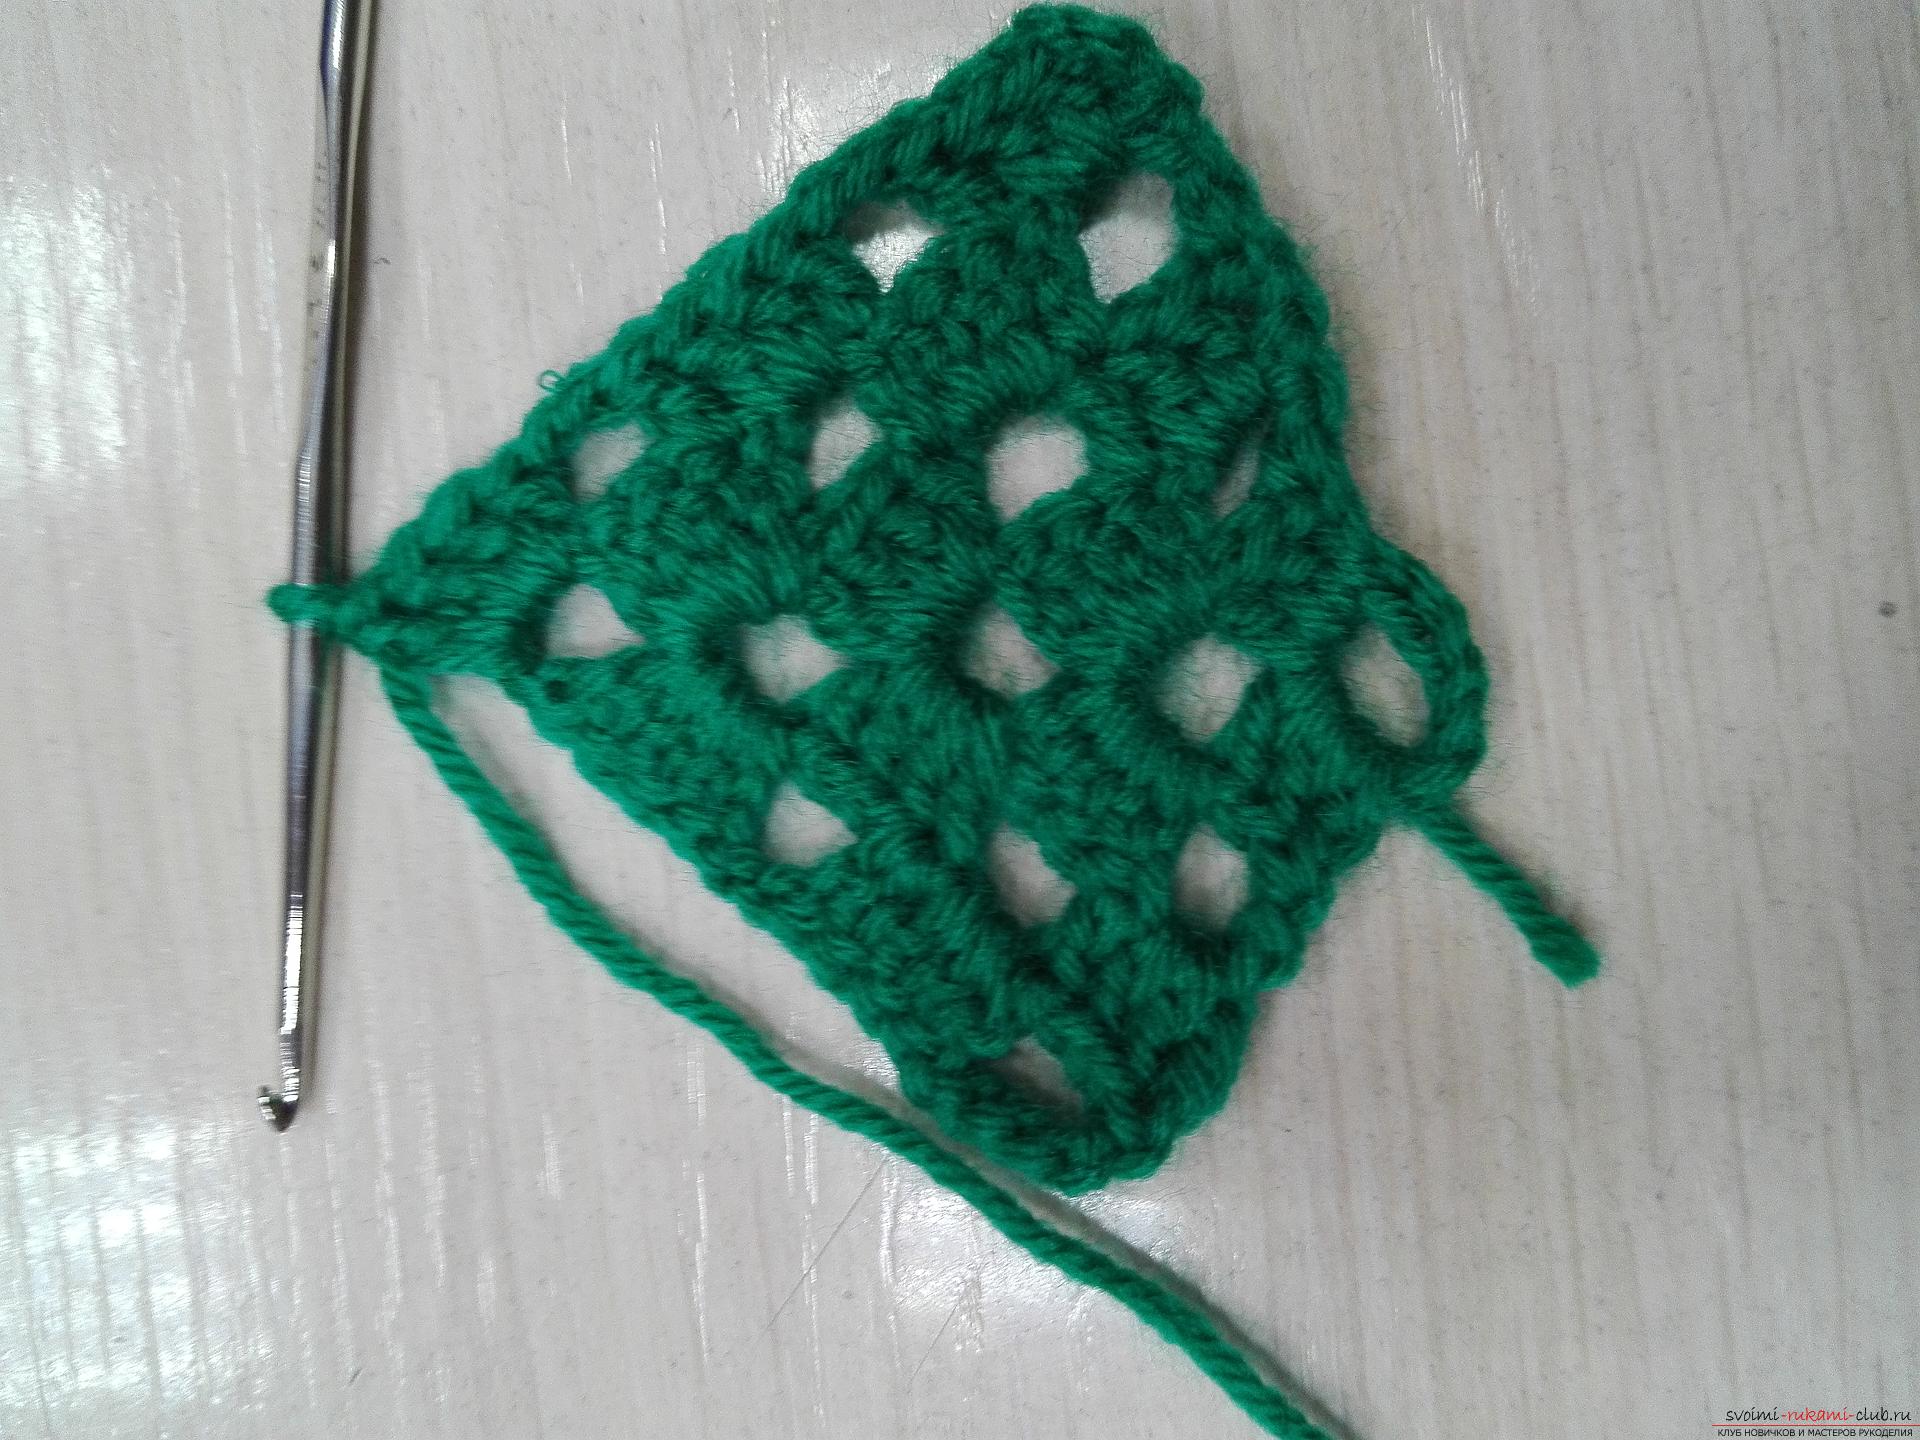 This master class on knitting is designed by the lover - he will teach how to tie the heart crochet. Photo Number 9